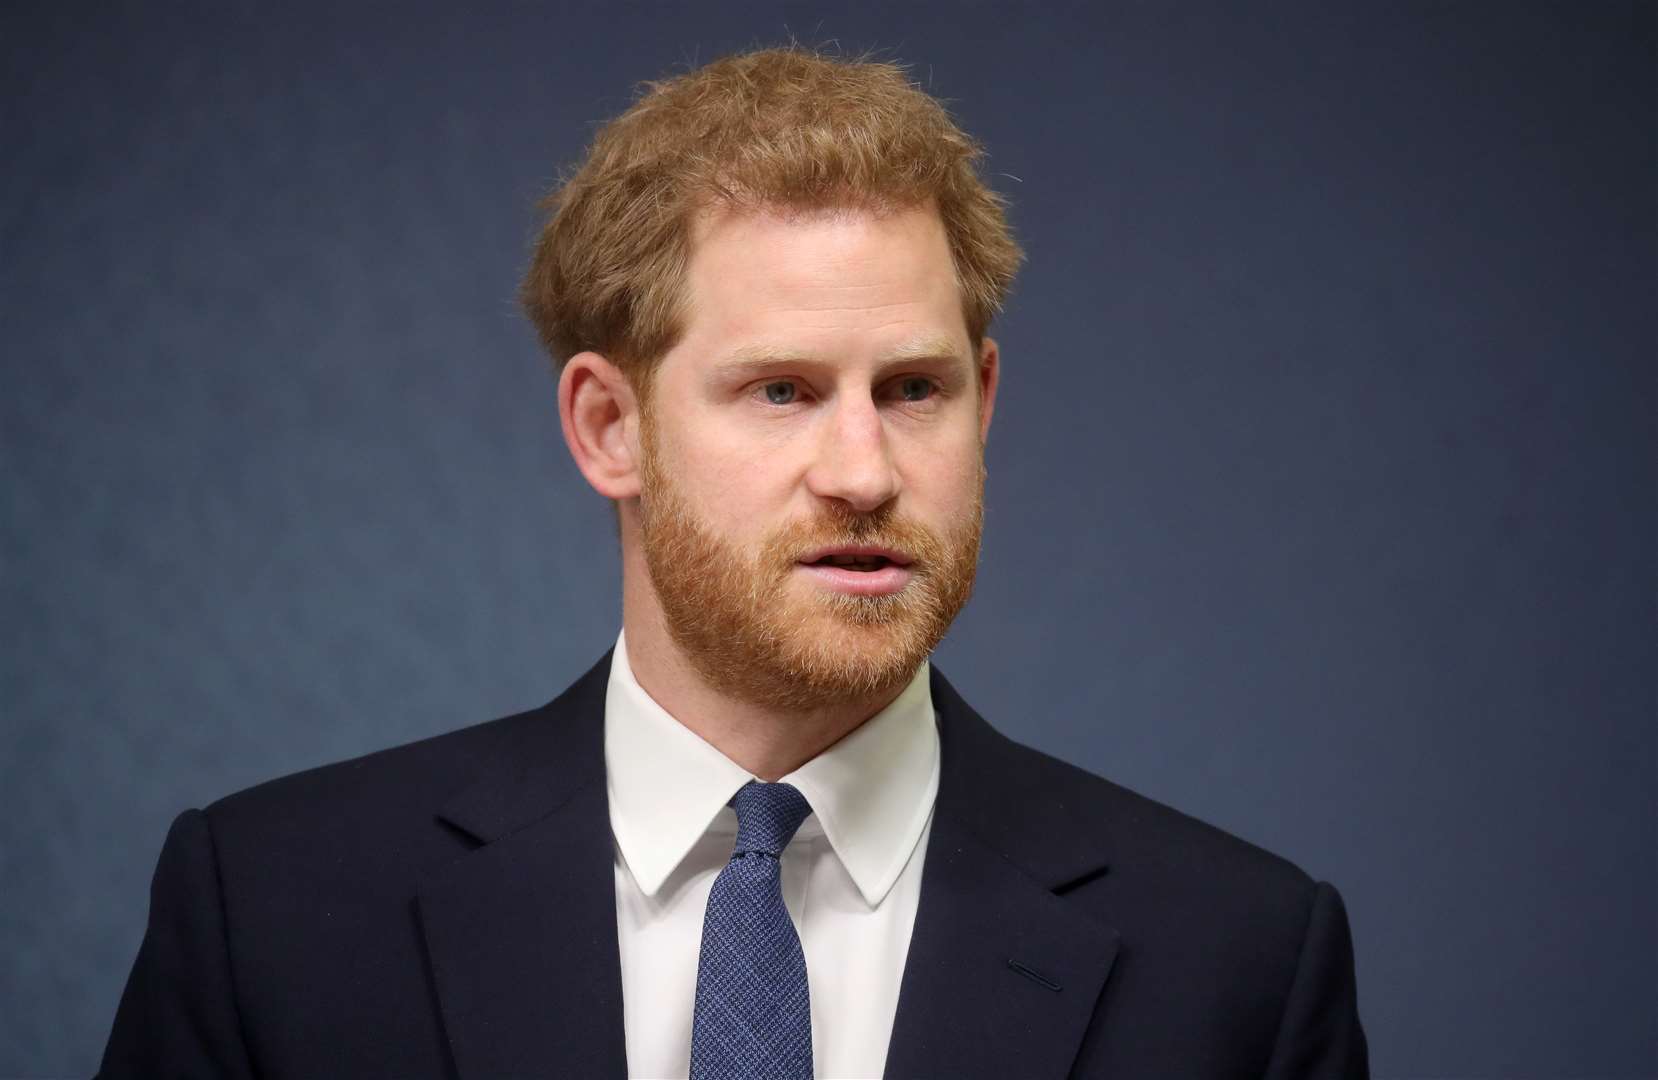 The Duke of Sussex has spoken about his mother for the programme (Chris Jackson/PA)